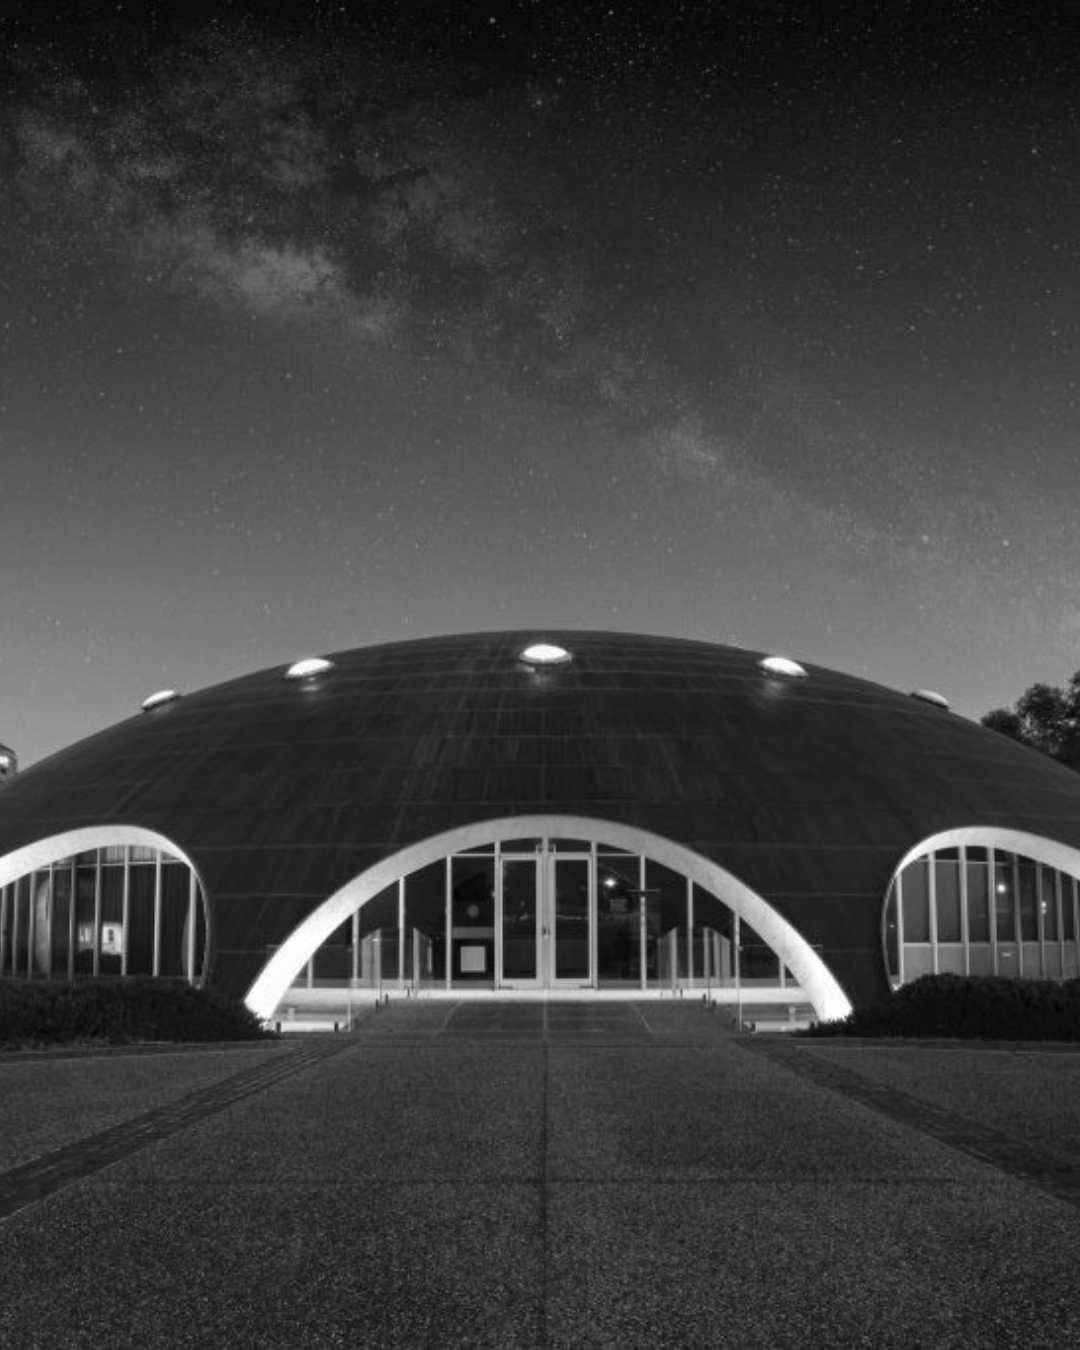 Shine Dome (The Australian Academy of Science)| Canberra, Australia | 1959 | Roy Ground